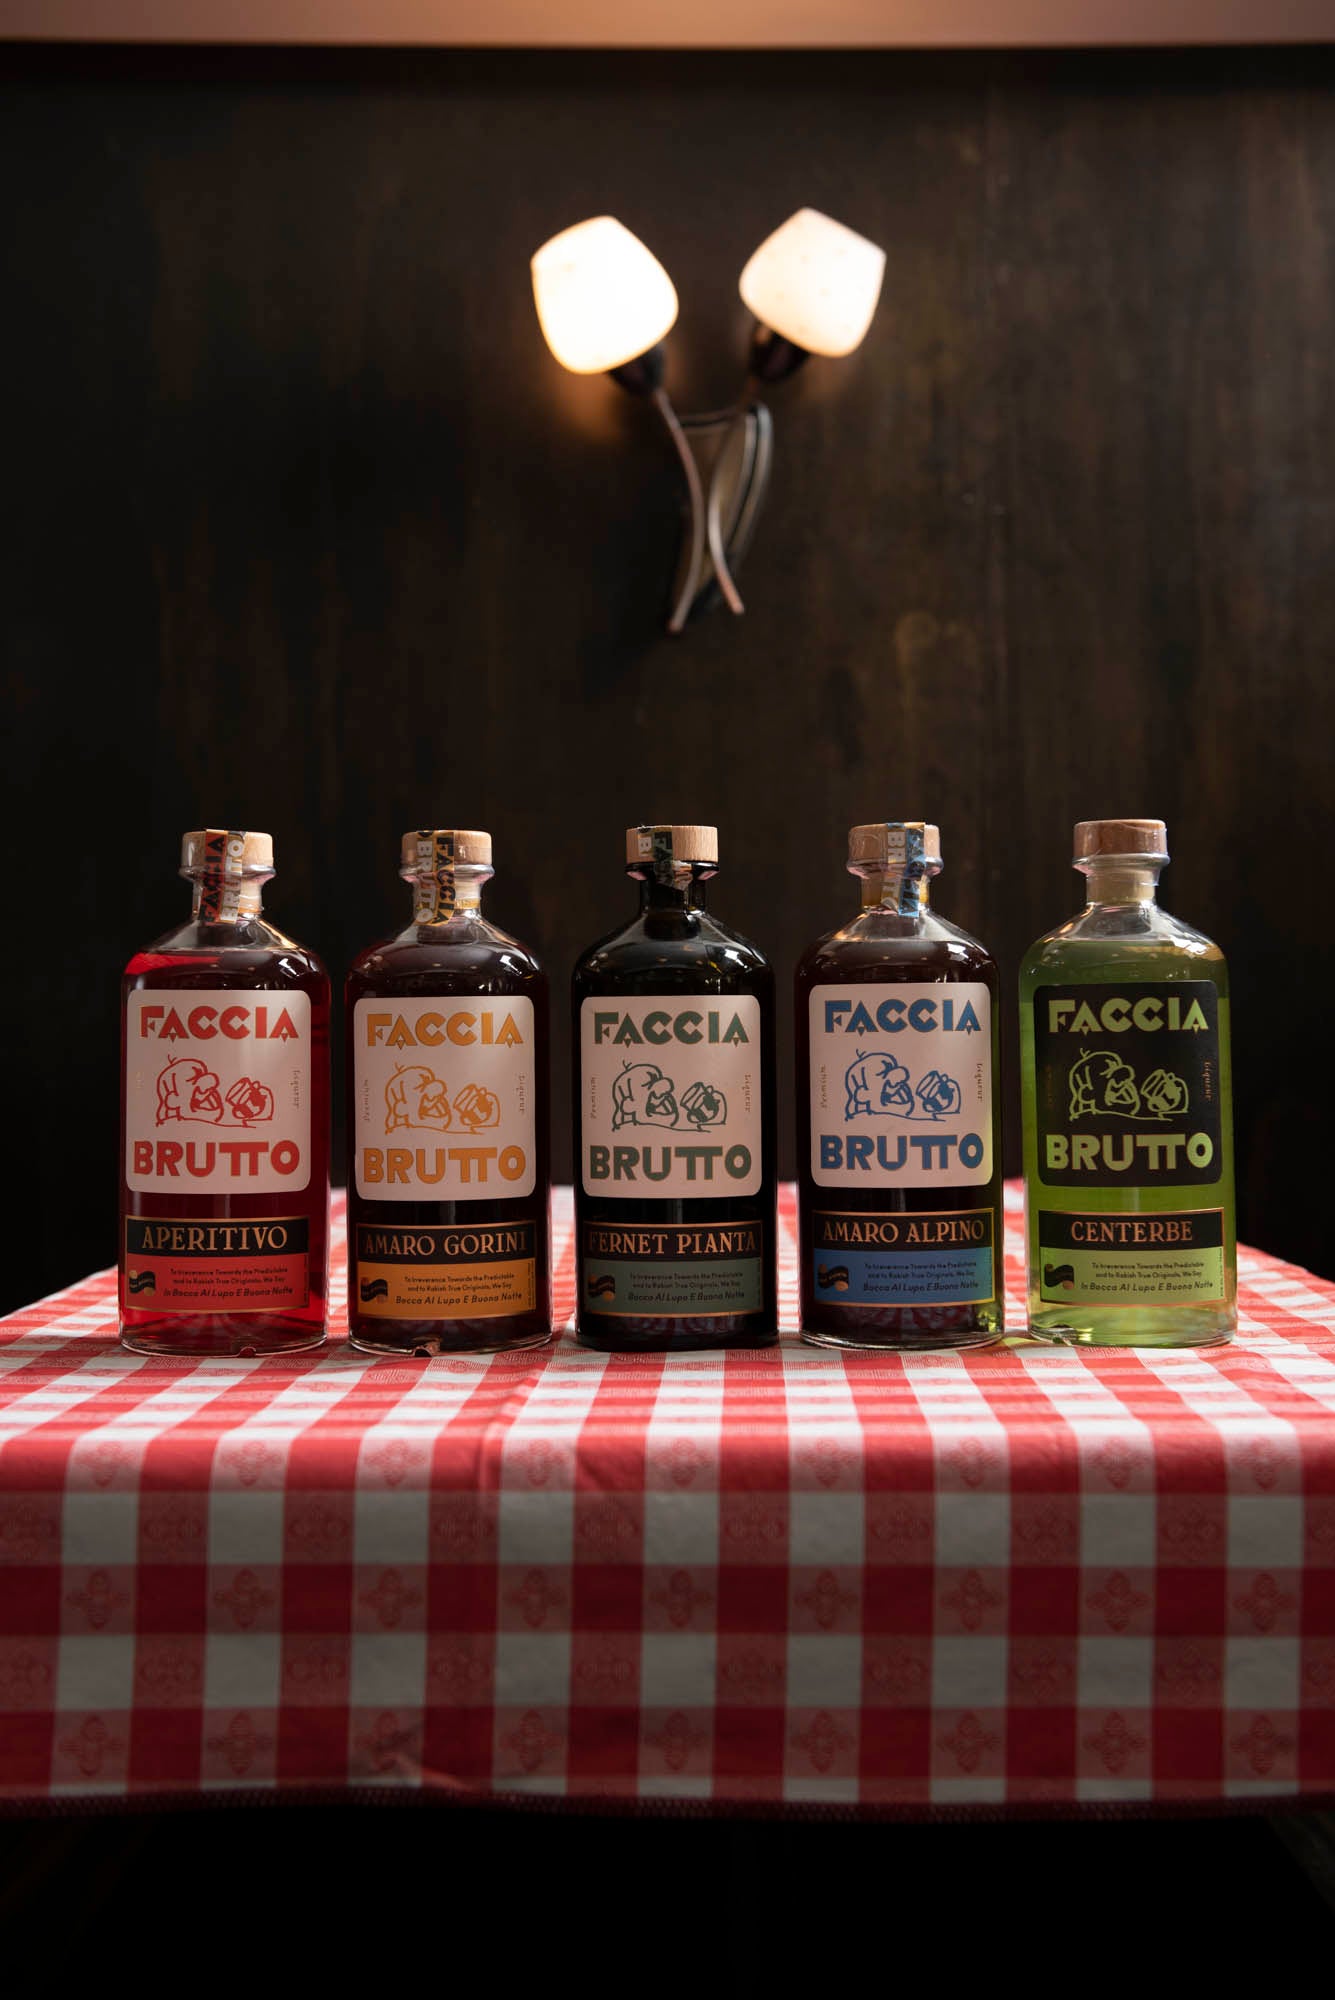 Five Faccia Brutto bottles lined up on table with classic red checkered table cloth